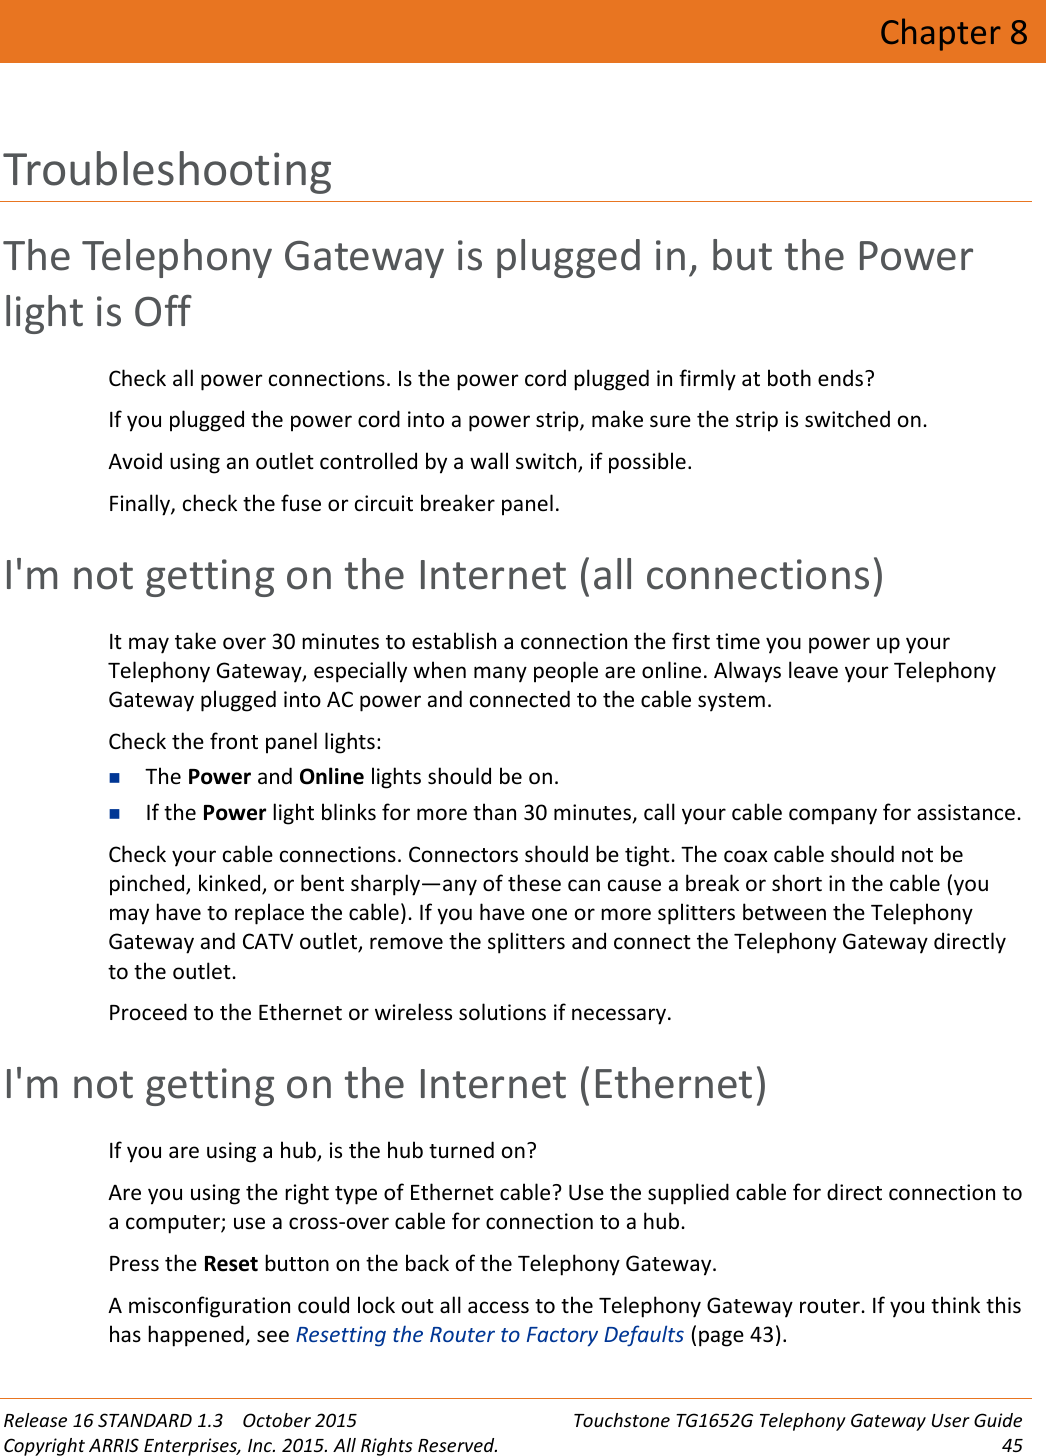 Release 16 STANDARD 1.3 October 2015 Touchstone TG1652G Telephony Gateway User GuideCopyright ARRIS Enterprises, Inc. 2015. All Rights Reserved. 45Chapter 8TroubleshootingThe Telephony Gateway is plugged in, but the Powerlight is OffCheck all power connections. Is the power cord plugged in firmly at both ends?If you plugged the power cord into a power strip, make sure the strip is switched on.Avoid using an outlet controlled by a wall switch, if possible.Finally, check the fuse or circuit breaker panel.I&apos;m not getting on the Internet (all connections)It may take over 30 minutes to establish a connection the first time you power up yourTelephony Gateway, especially when many people are online. Always leave your TelephonyGateway plugged into AC power and connected to the cable system.Check the front panel lights:The Power and Online lights should be on.If the Power light blinks for more than 30 minutes, call your cable company for assistance.Check your cable connections. Connectors should be tight. The coax cable should not bepinched, kinked, or bent sharply—any of these can cause a break or short in the cable (youmay have to replace the cable). If you have one or more splitters between the TelephonyGateway and CATV outlet, remove the splitters and connect the Telephony Gateway directlyto the outlet.Proceed to the Ethernet or wireless solutions if necessary.I&apos;m not getting on the Internet (Ethernet)If you are using a hub, is the hub turned on?Are you using the right type of Ethernet cable? Use the supplied cable for direct connection toa computer; use a cross-over cable for connection to a hub.Press the Reset button on the back of the Telephony Gateway.A misconfiguration could lock out all access to the Telephony Gateway router. If you think thishas happened, see Resetting the Router to Factory Defaults (page 43).